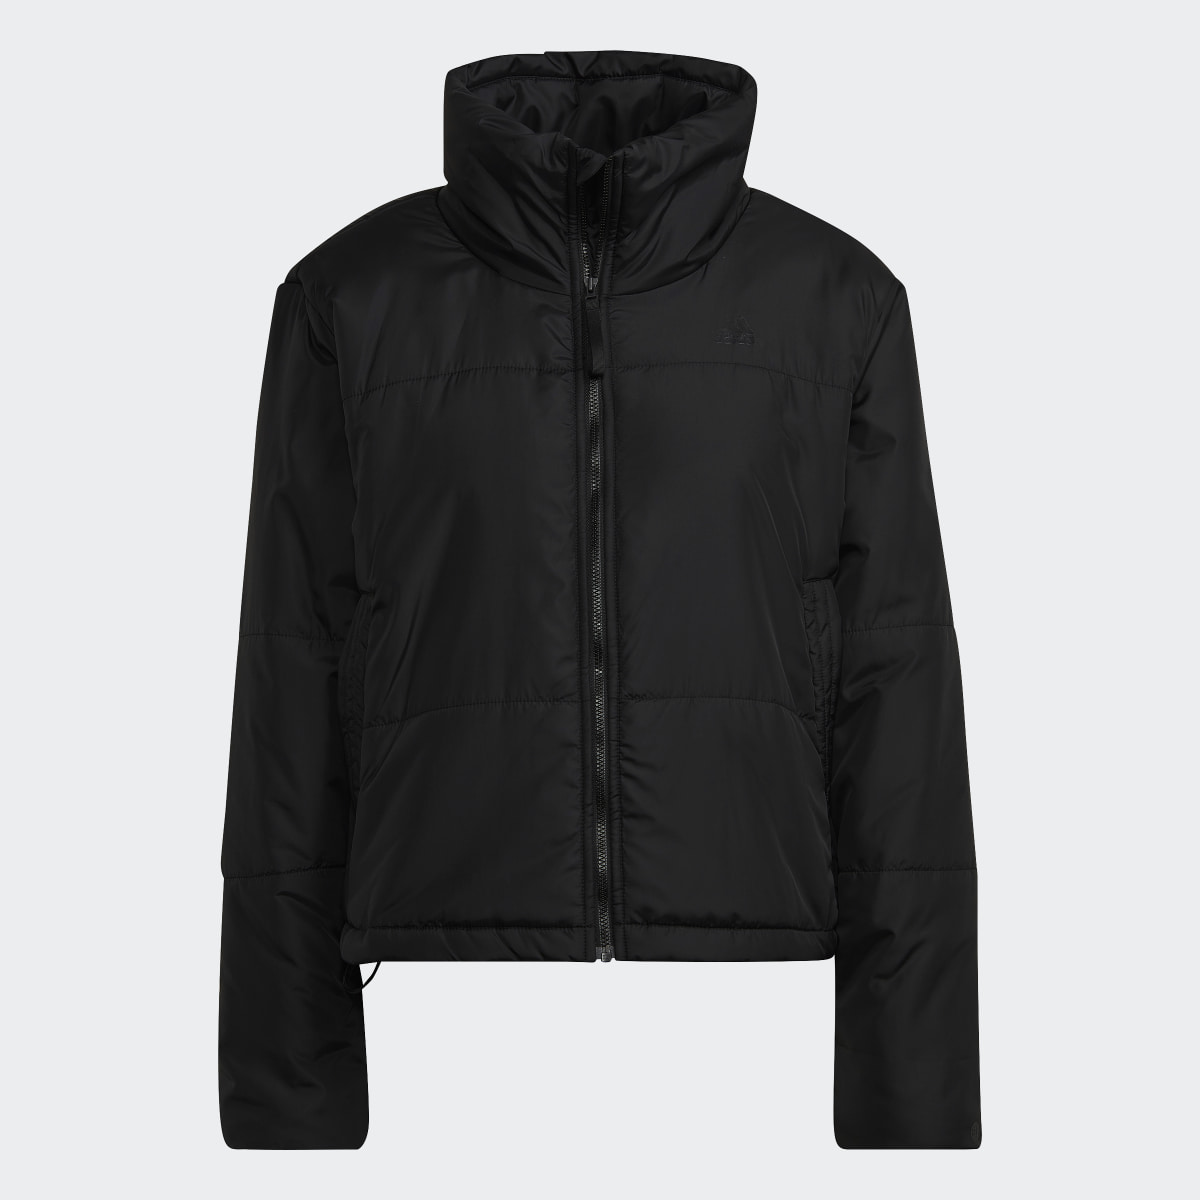 Adidas BSC Insulated Jacket. 5